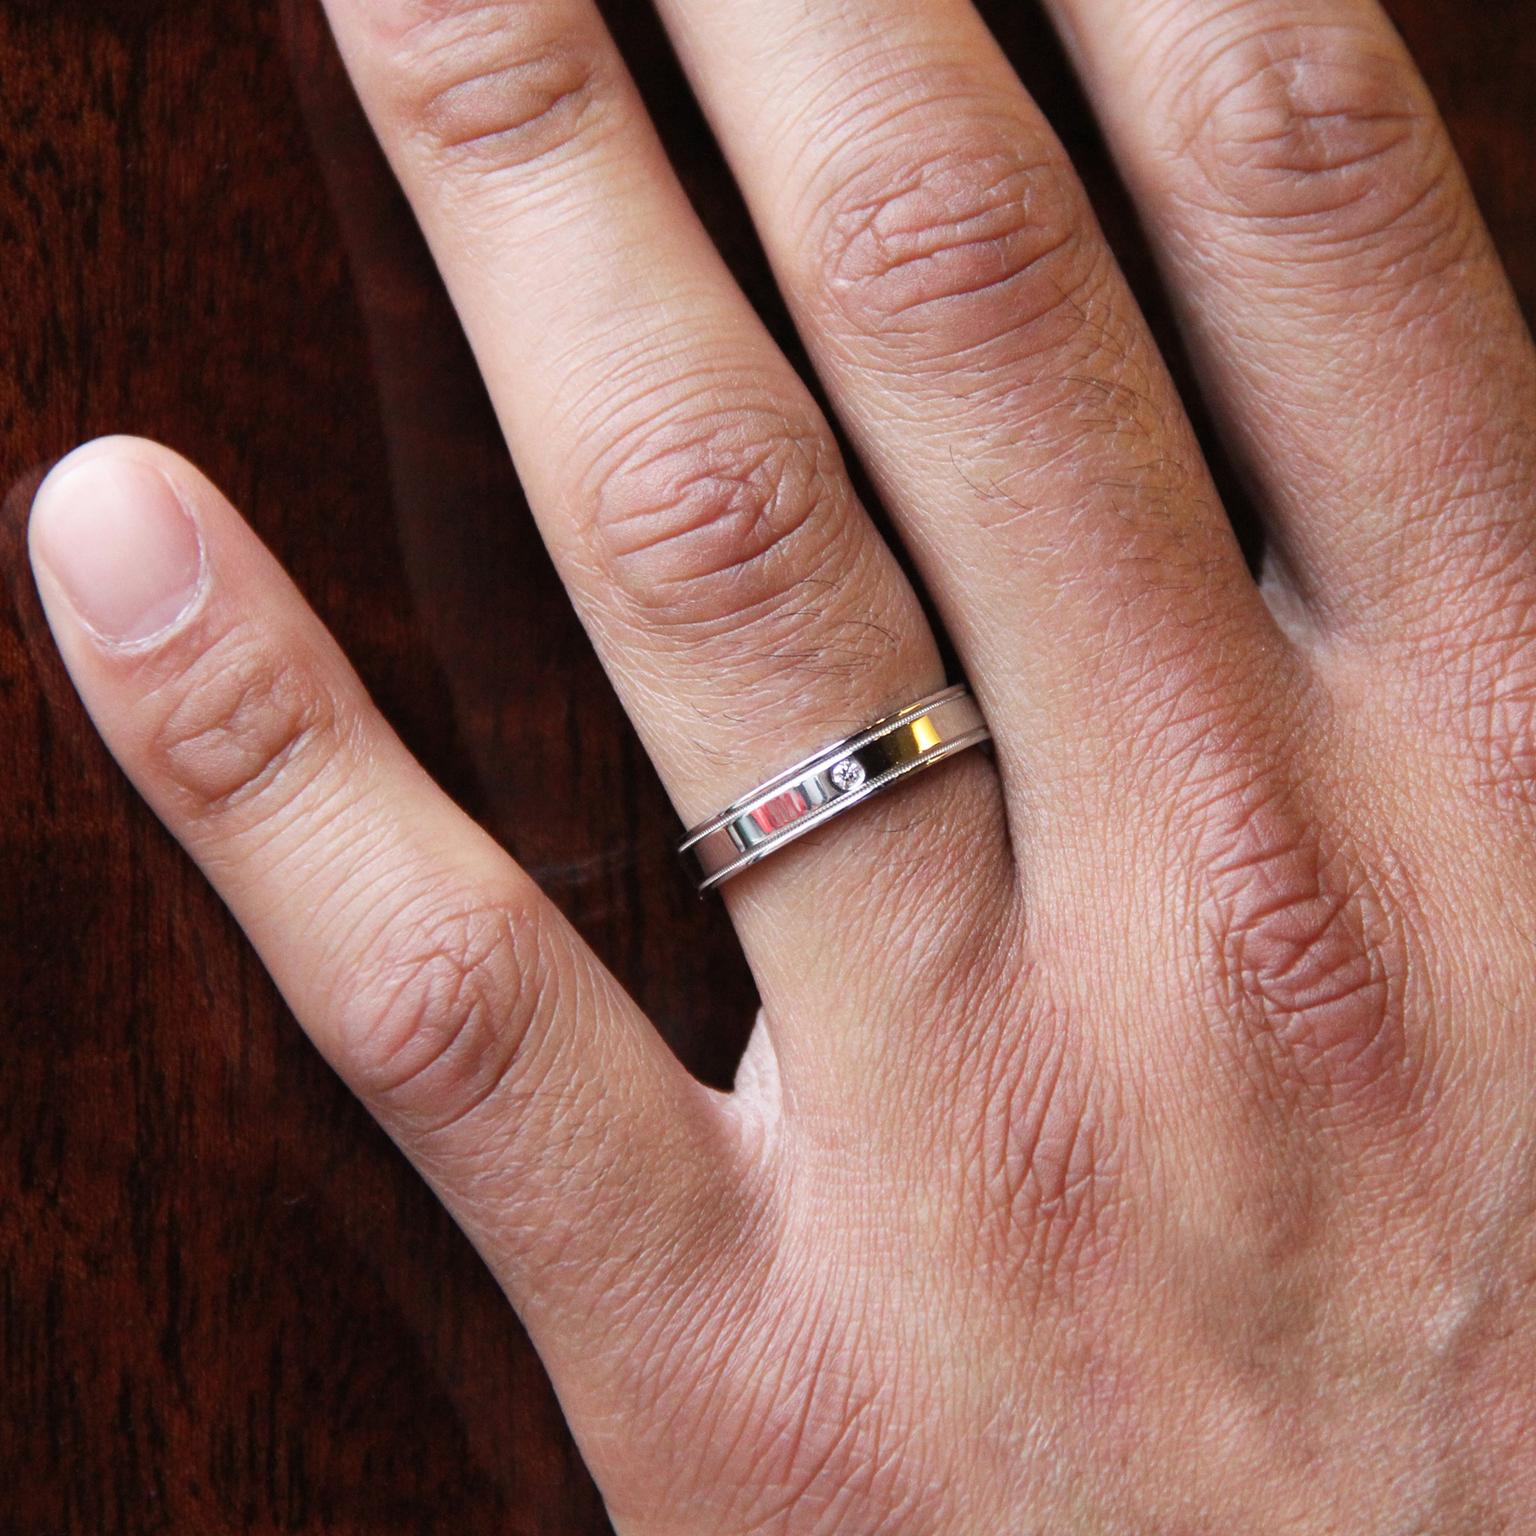 gay engagement rings cartier